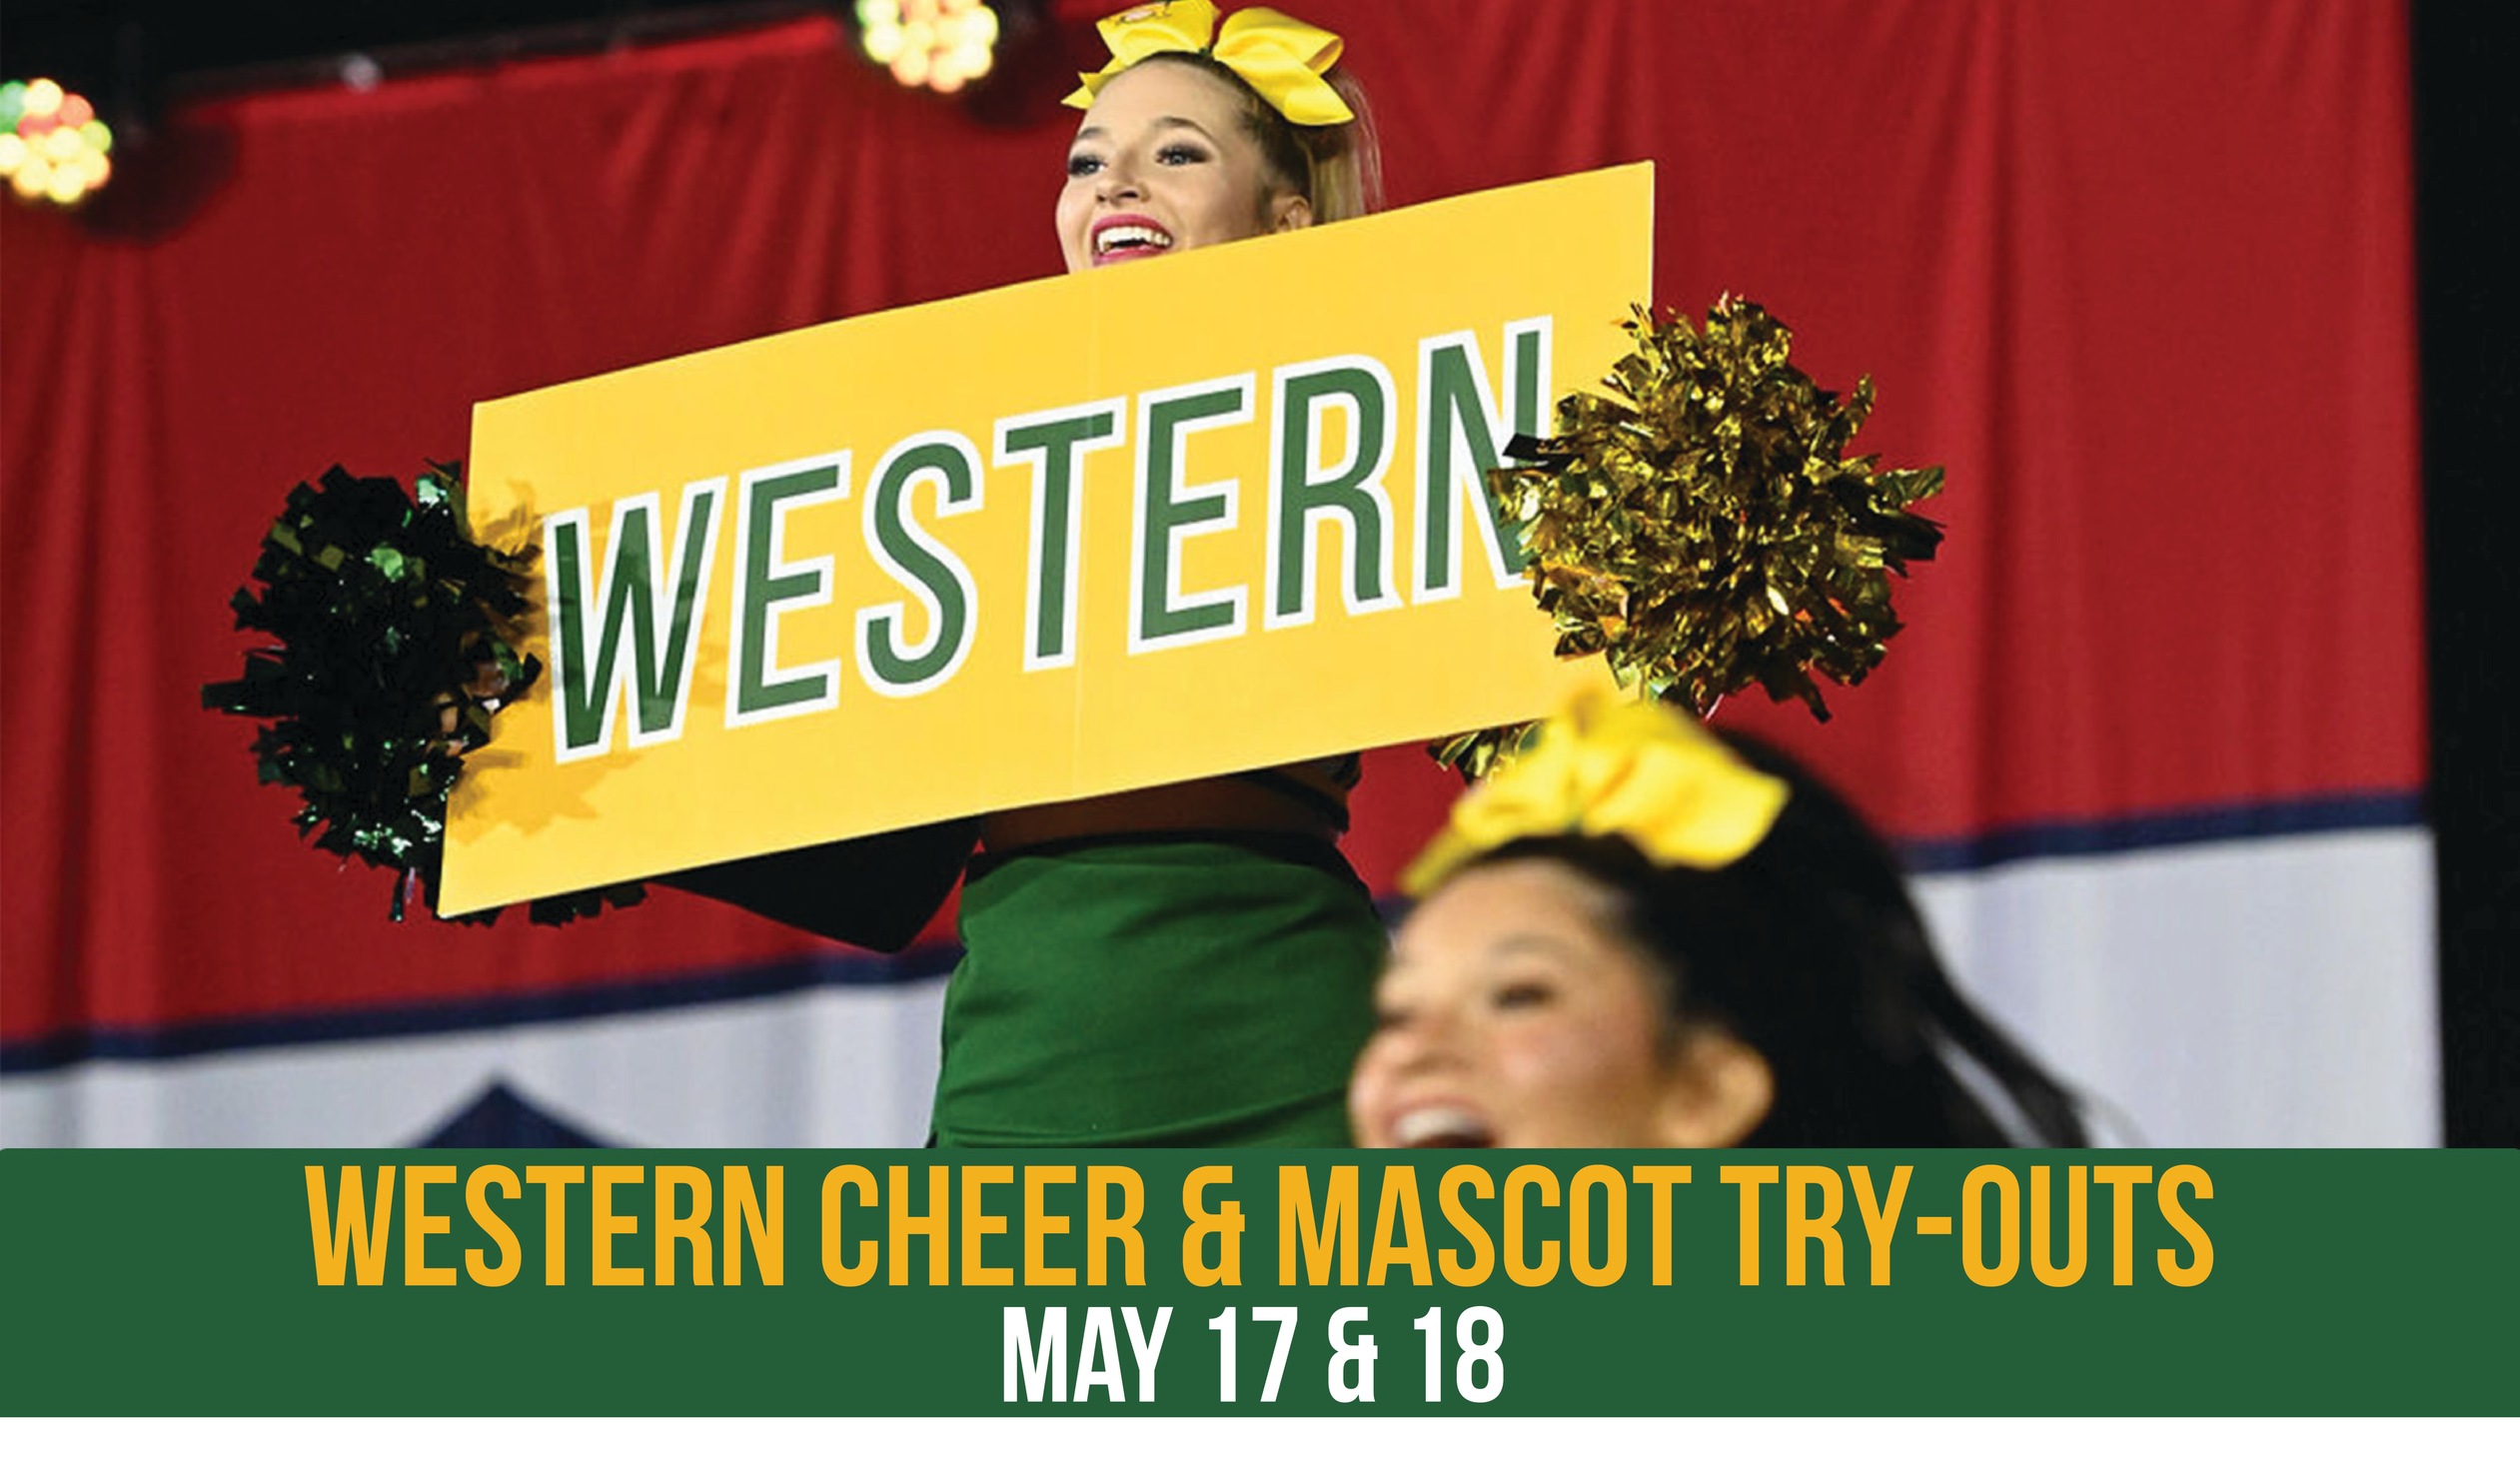 Western Cheer and Mascot Try-outs in May